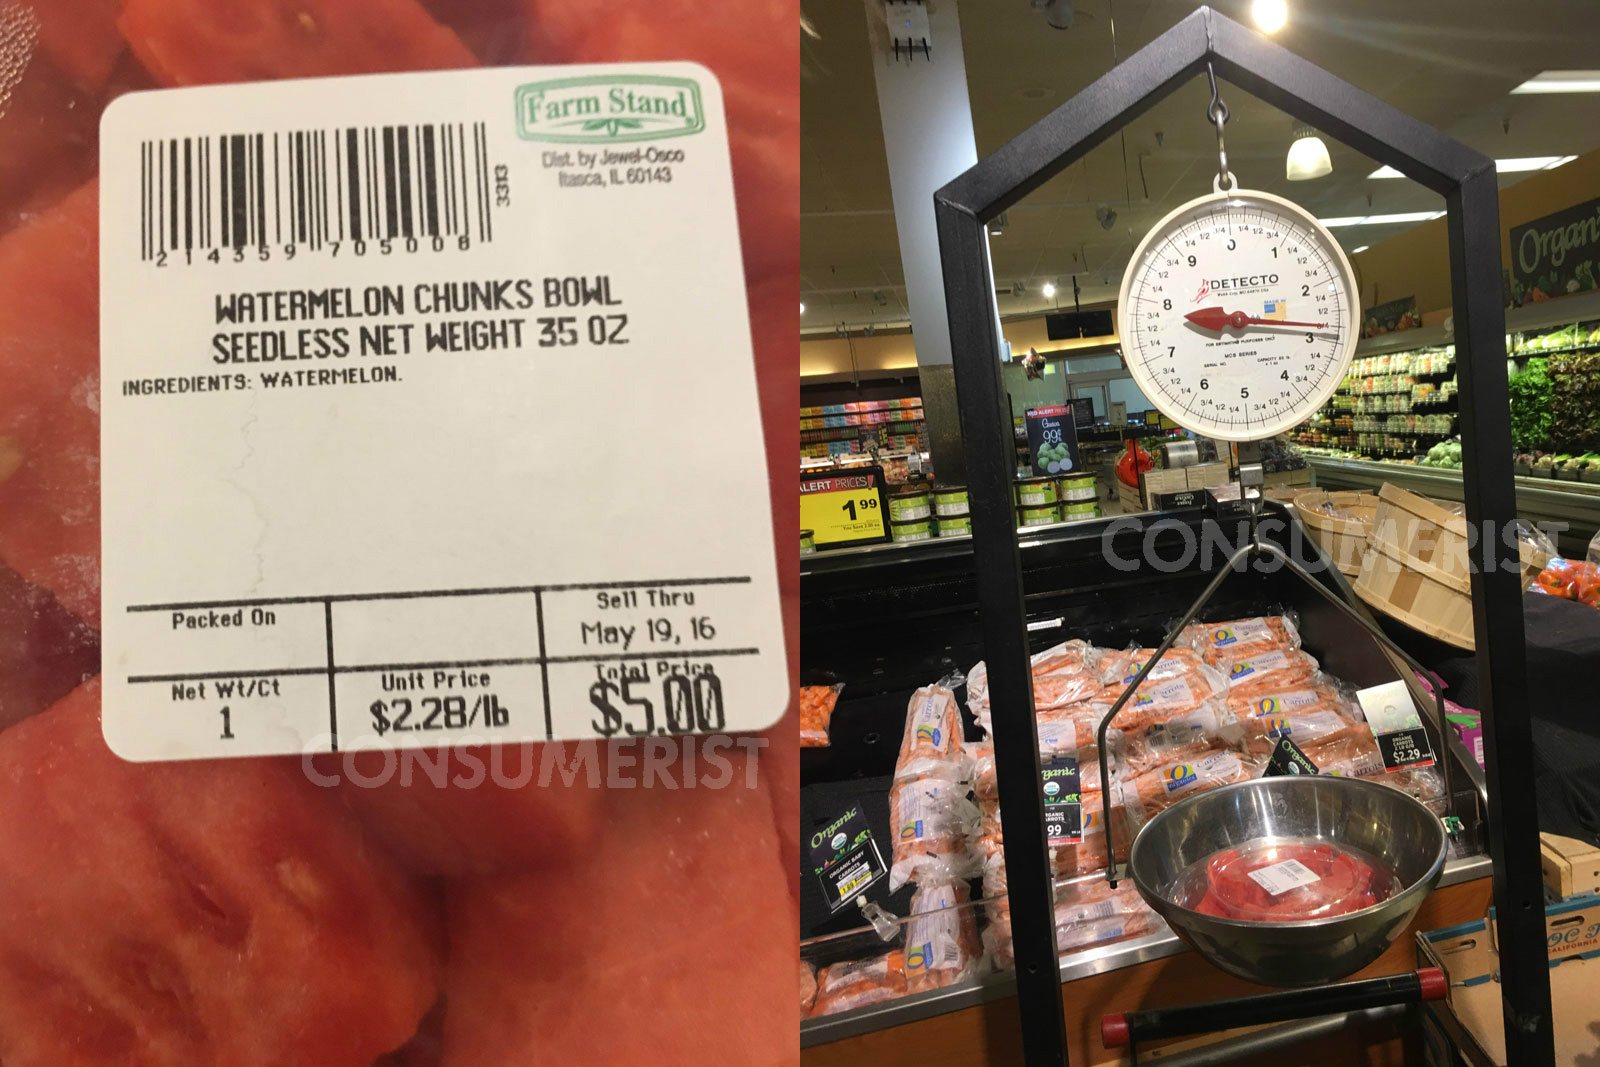 What Should I Do If The Prepackaged Produce At The Store Is Priced Incorrectly?